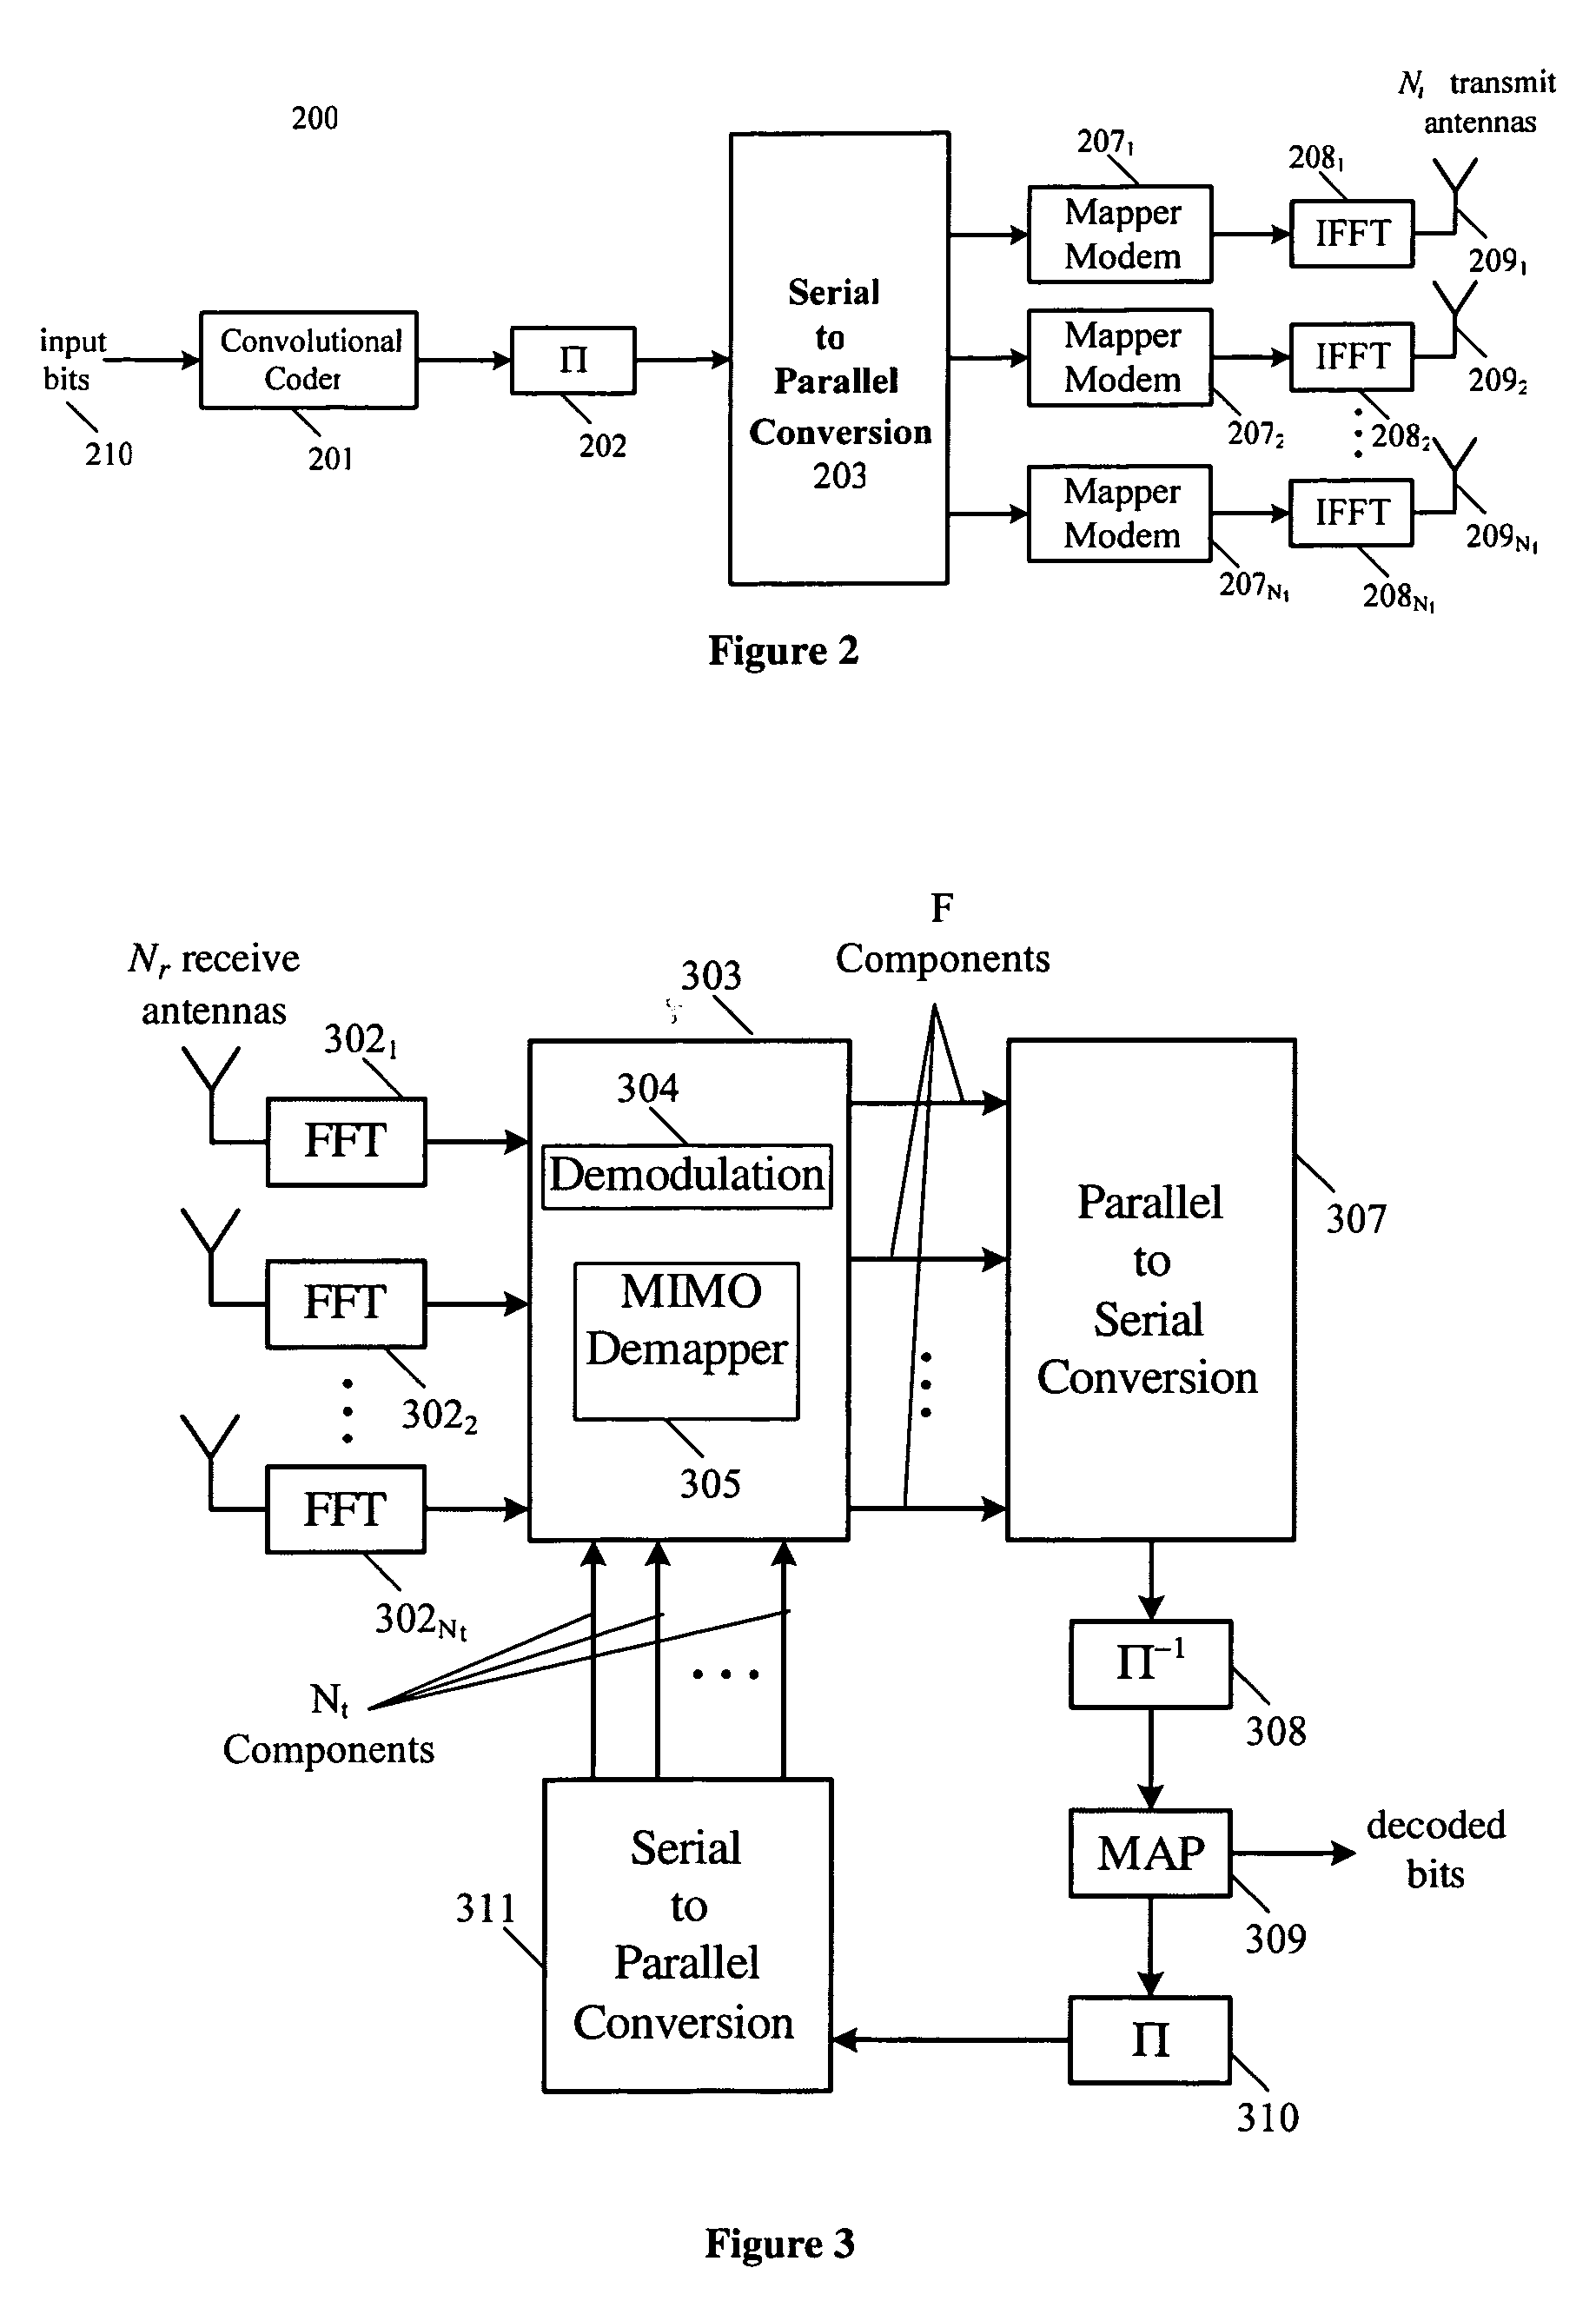 Adaptive maxlogmap-type receiver structures